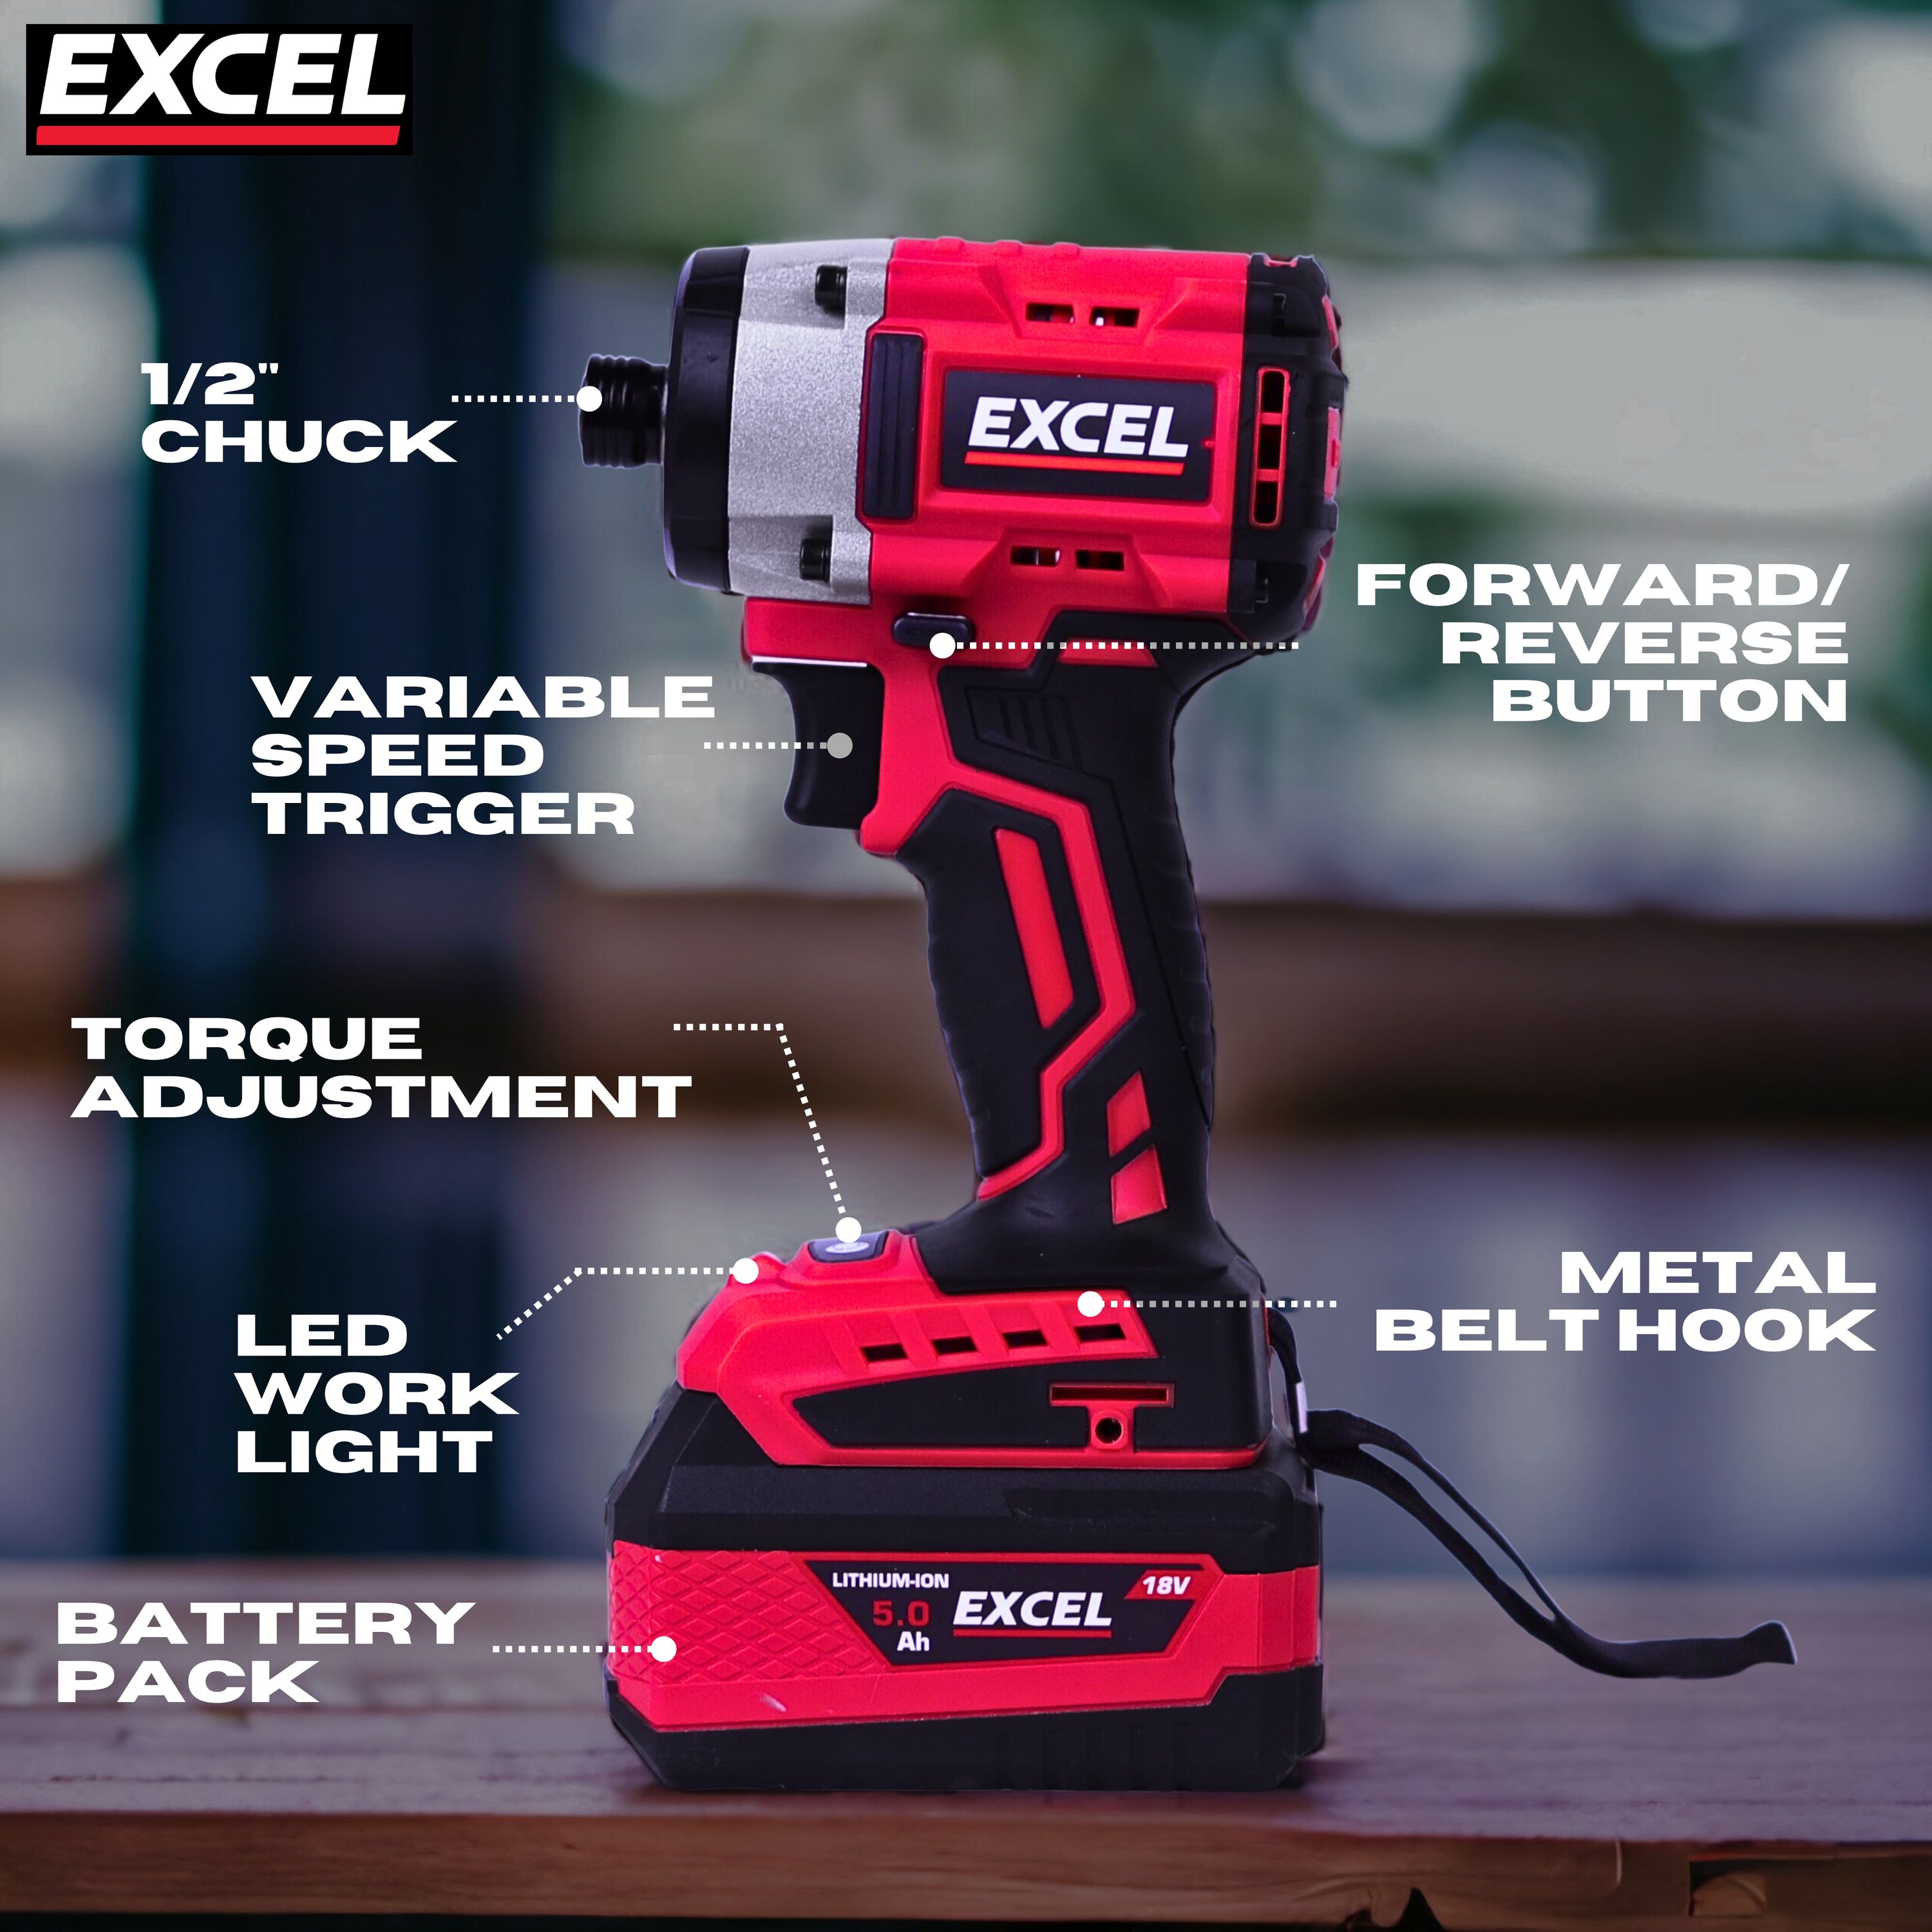 Excel 18V Cordless Brushless Impact Driver with 2 x 2.0Ah Battery & Charger